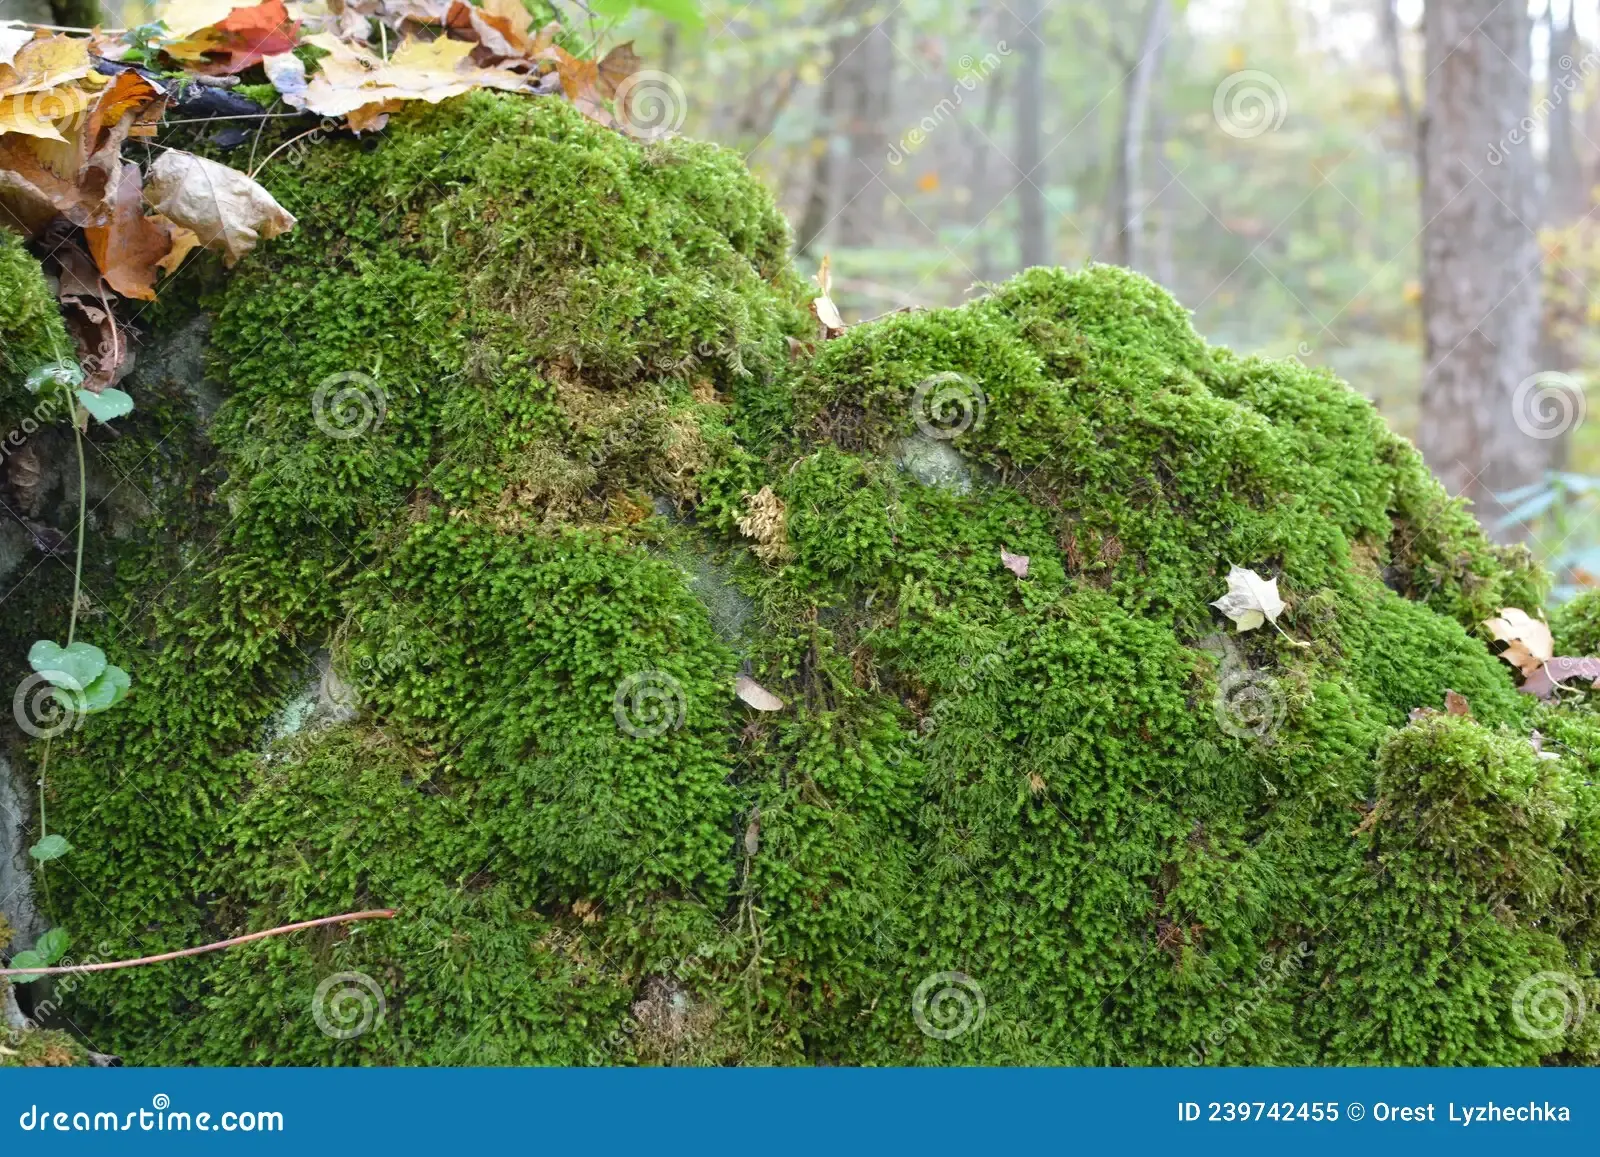 forest-wild-stone-grows-moss-anomodon-anomodon-moss-grows-stone-forest-239742455.jpg